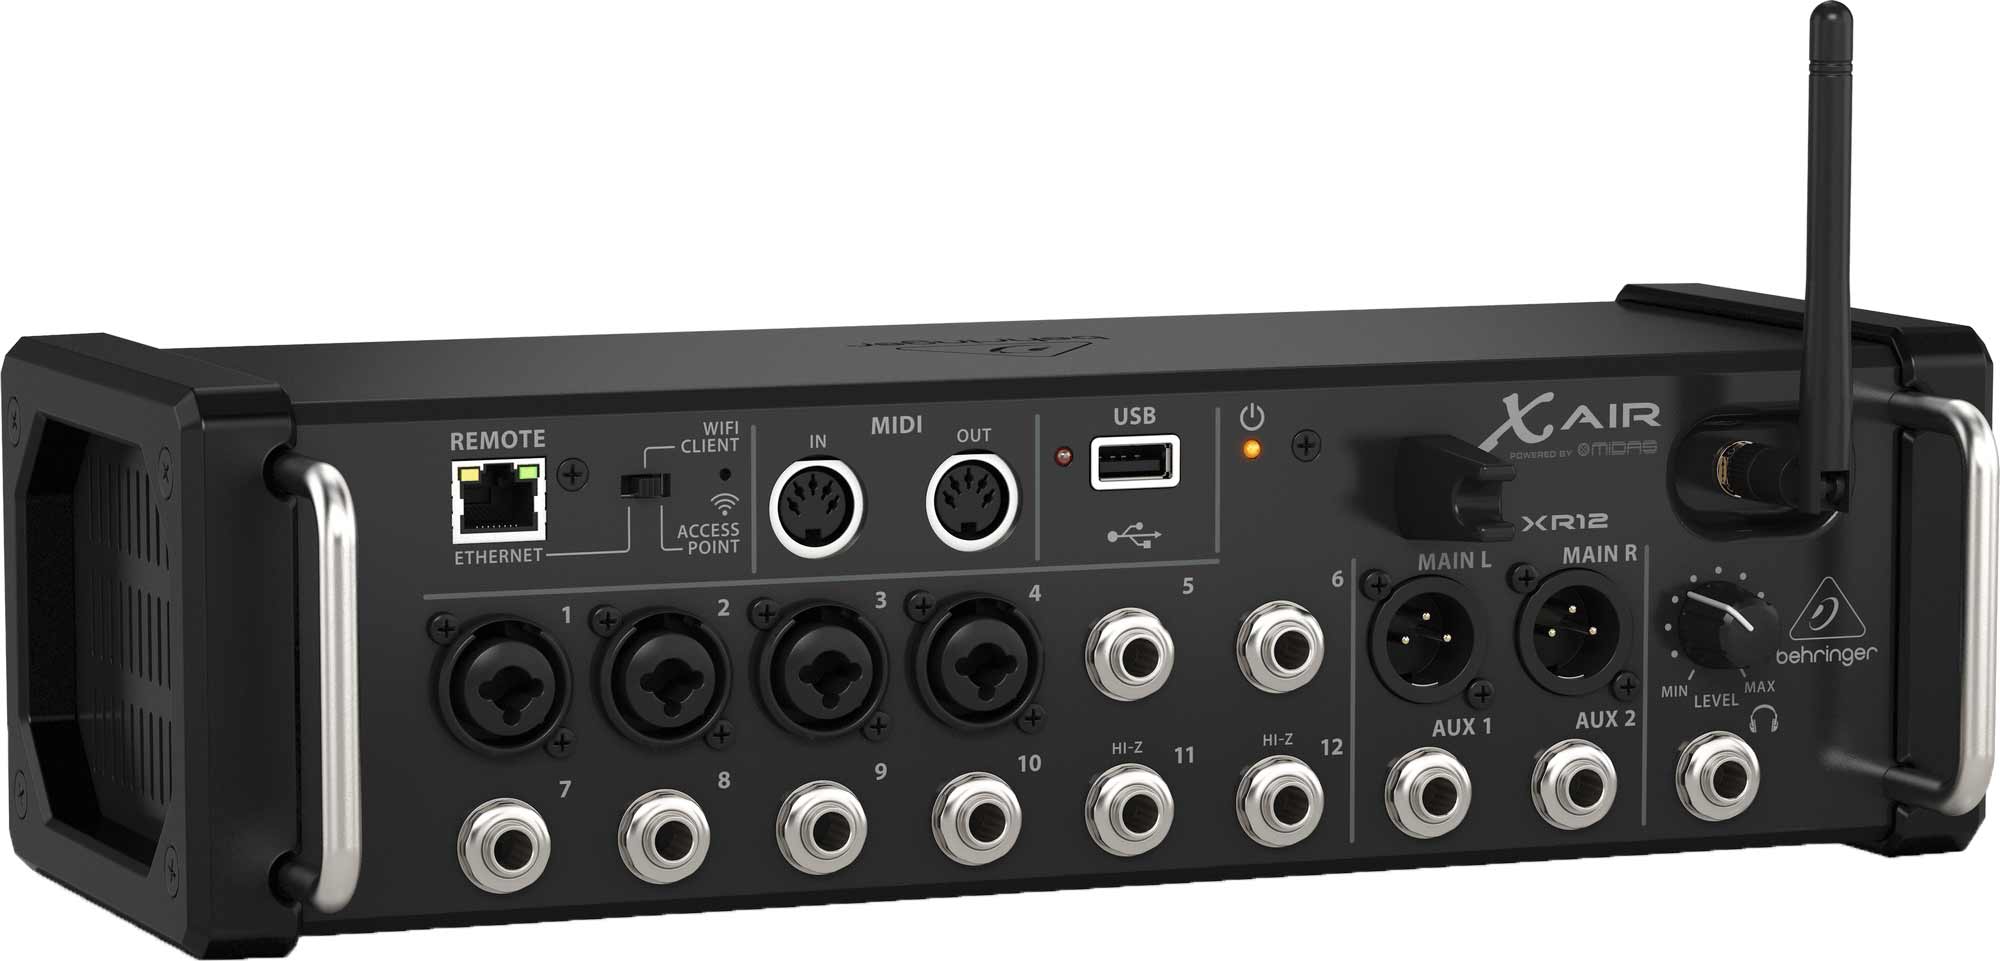 Behringer X AIR XR12 12-Input Digital Mixer for iPad/Android